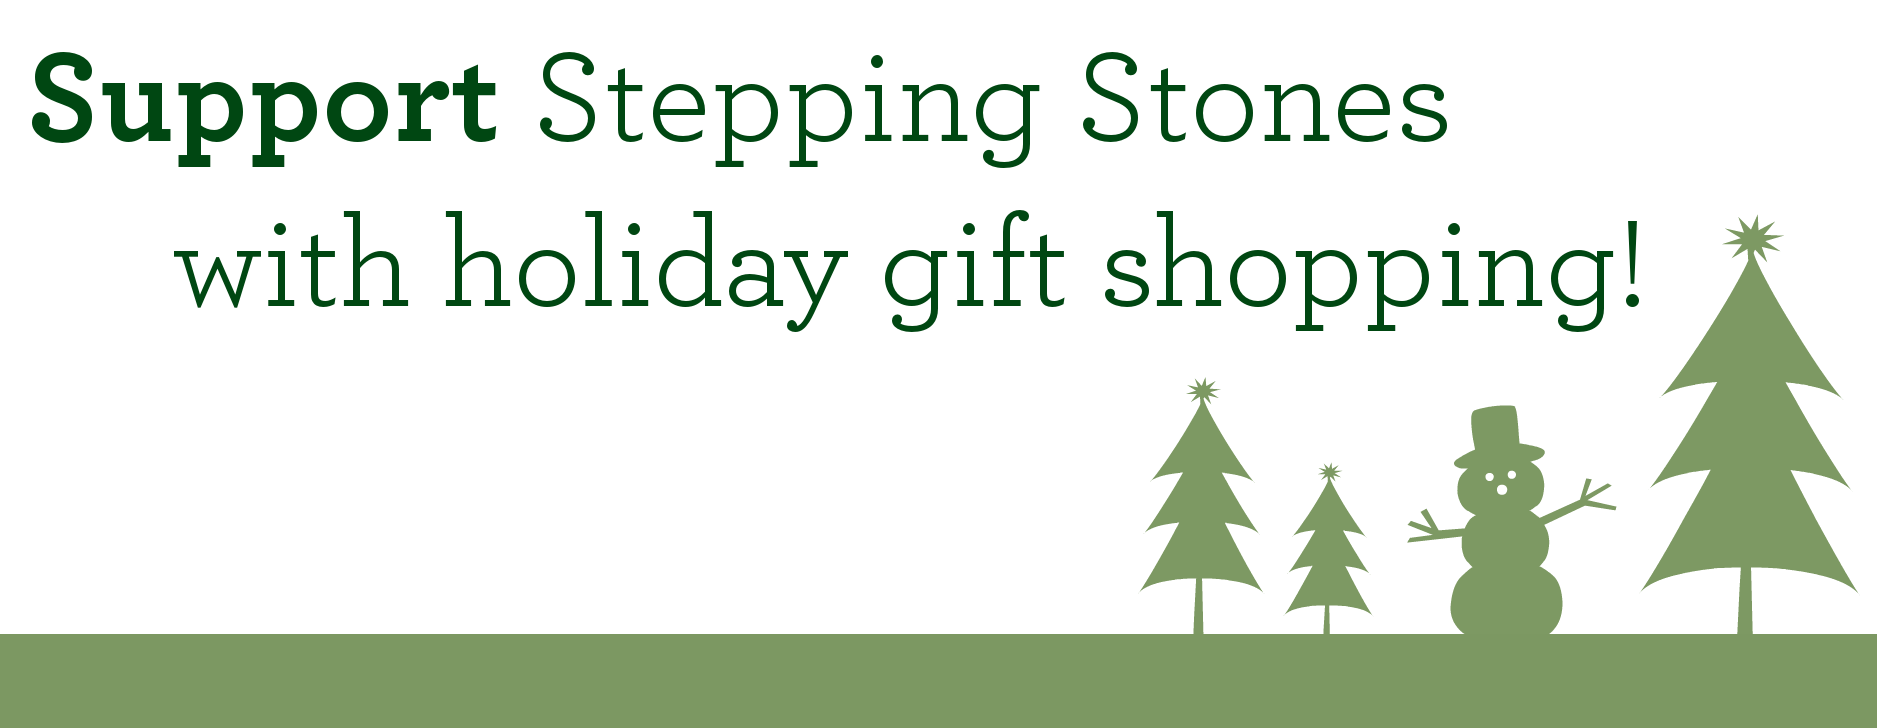 stepping-stones-holiday-gift-support